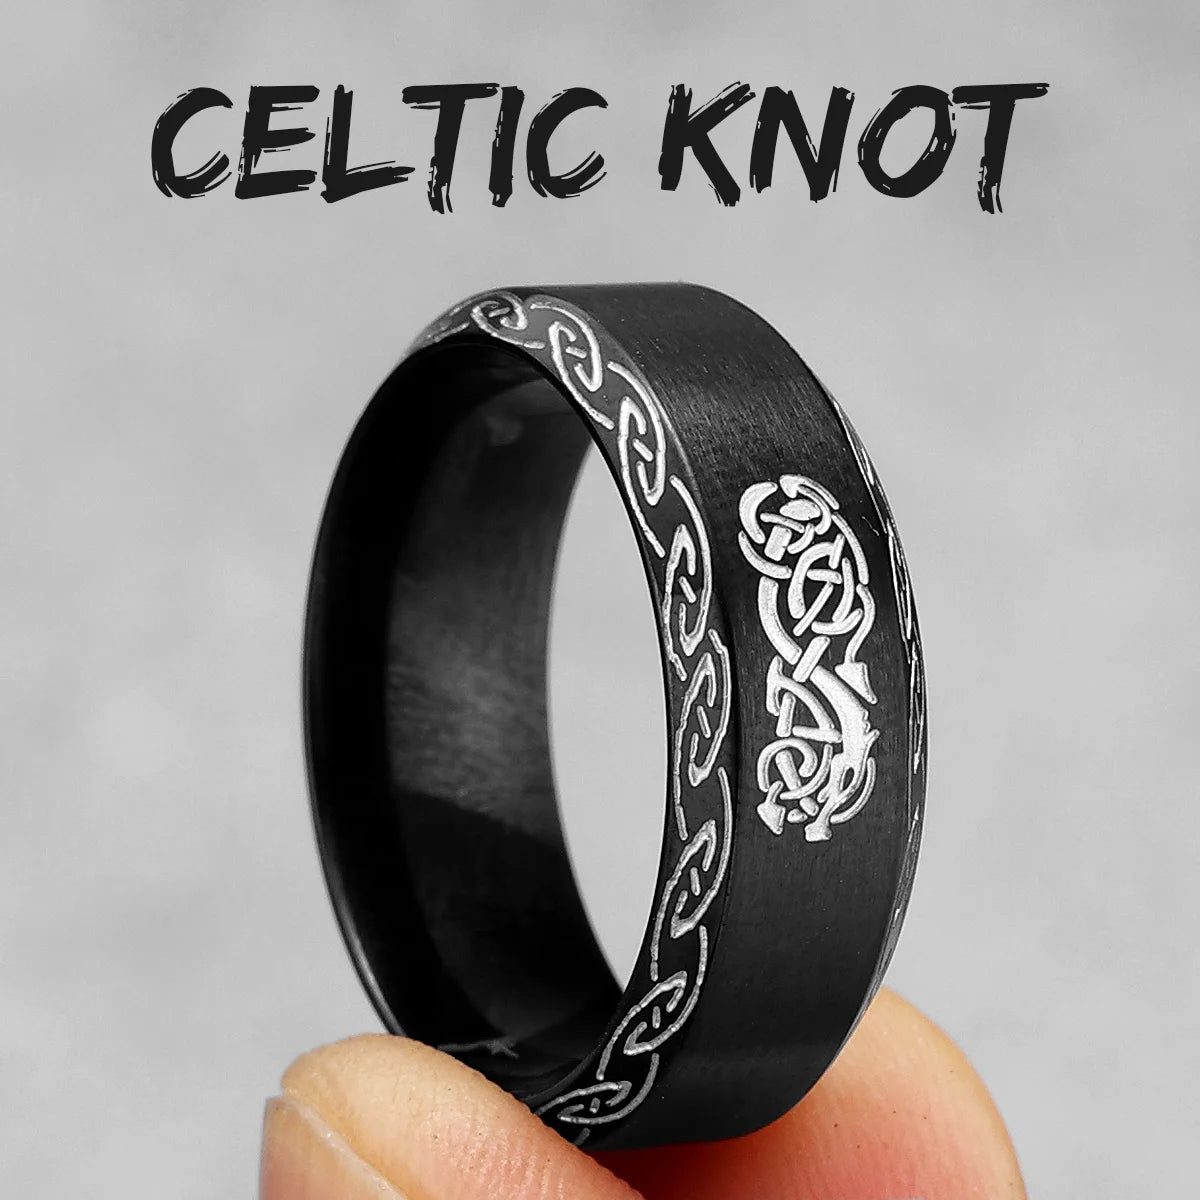 Black Edition - Viking Runes Celtic Knot Rings - Mythical Pieces 11 / R1009-Black